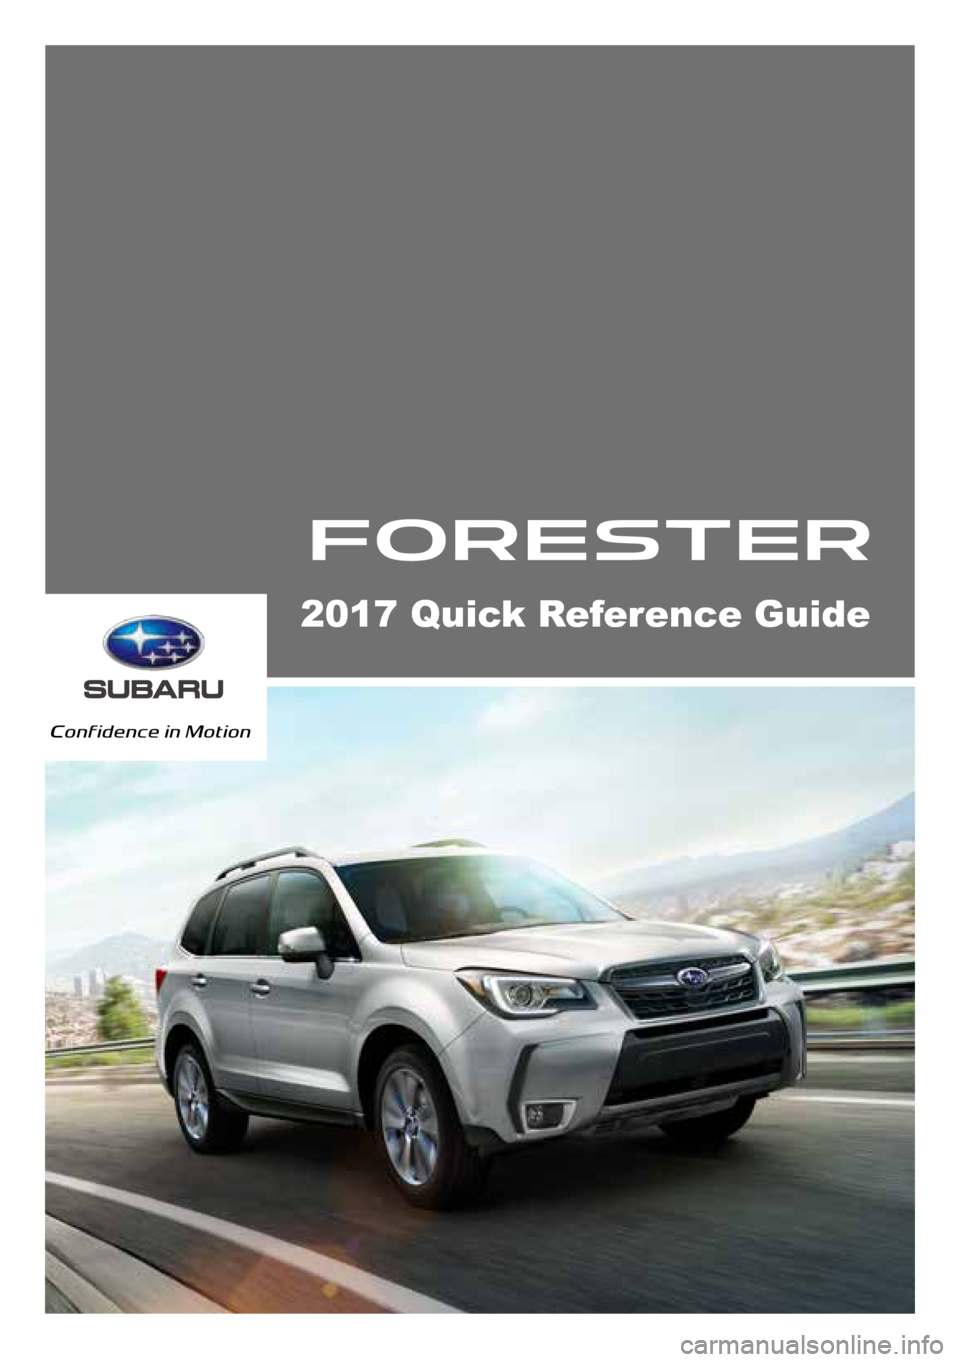 SUBARU FORESTER 2017 SJ / 4.G Quick Reference Guide 2017 Quick Reference Guide 